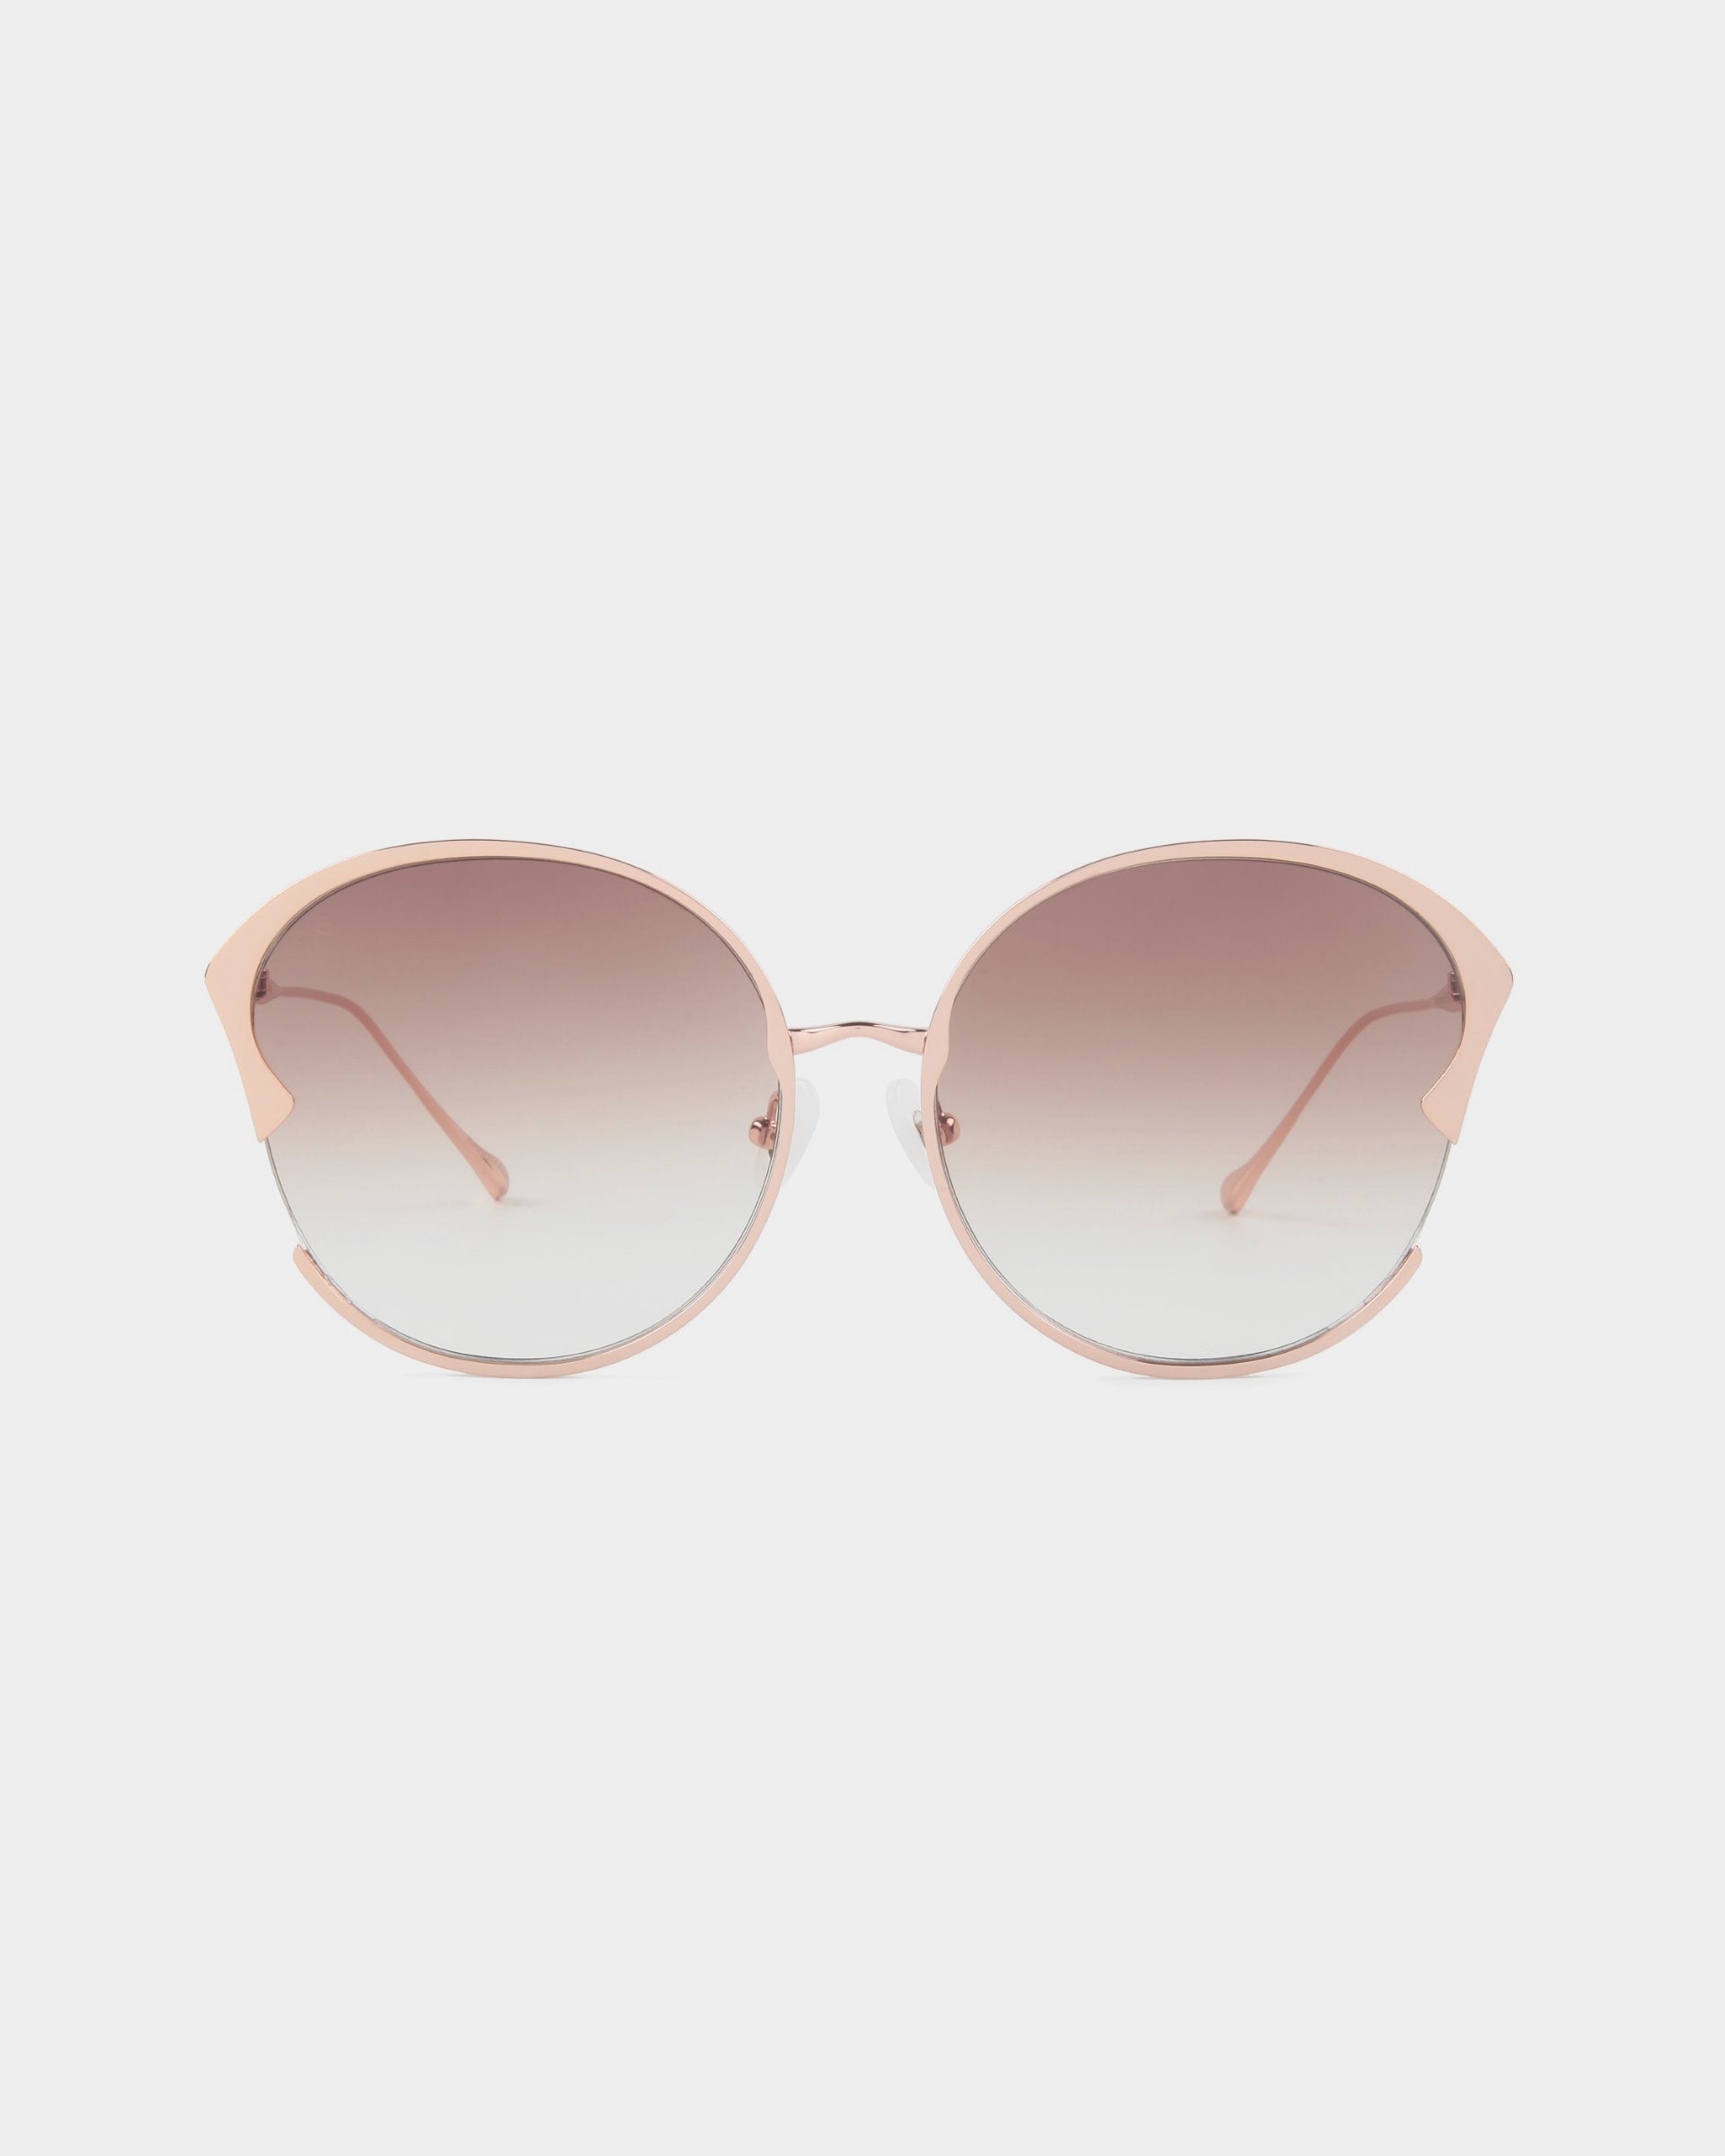 A pair of stylish For Art&#39;s Sake® Alectrona sunglasses with large, round, gradient lenses transitioning from dark to light shades. The frame is a light pink metal with a subtle cat-eye shape, featuring 18-karat gold-plated temples that are slim and matching in color. The background is white.